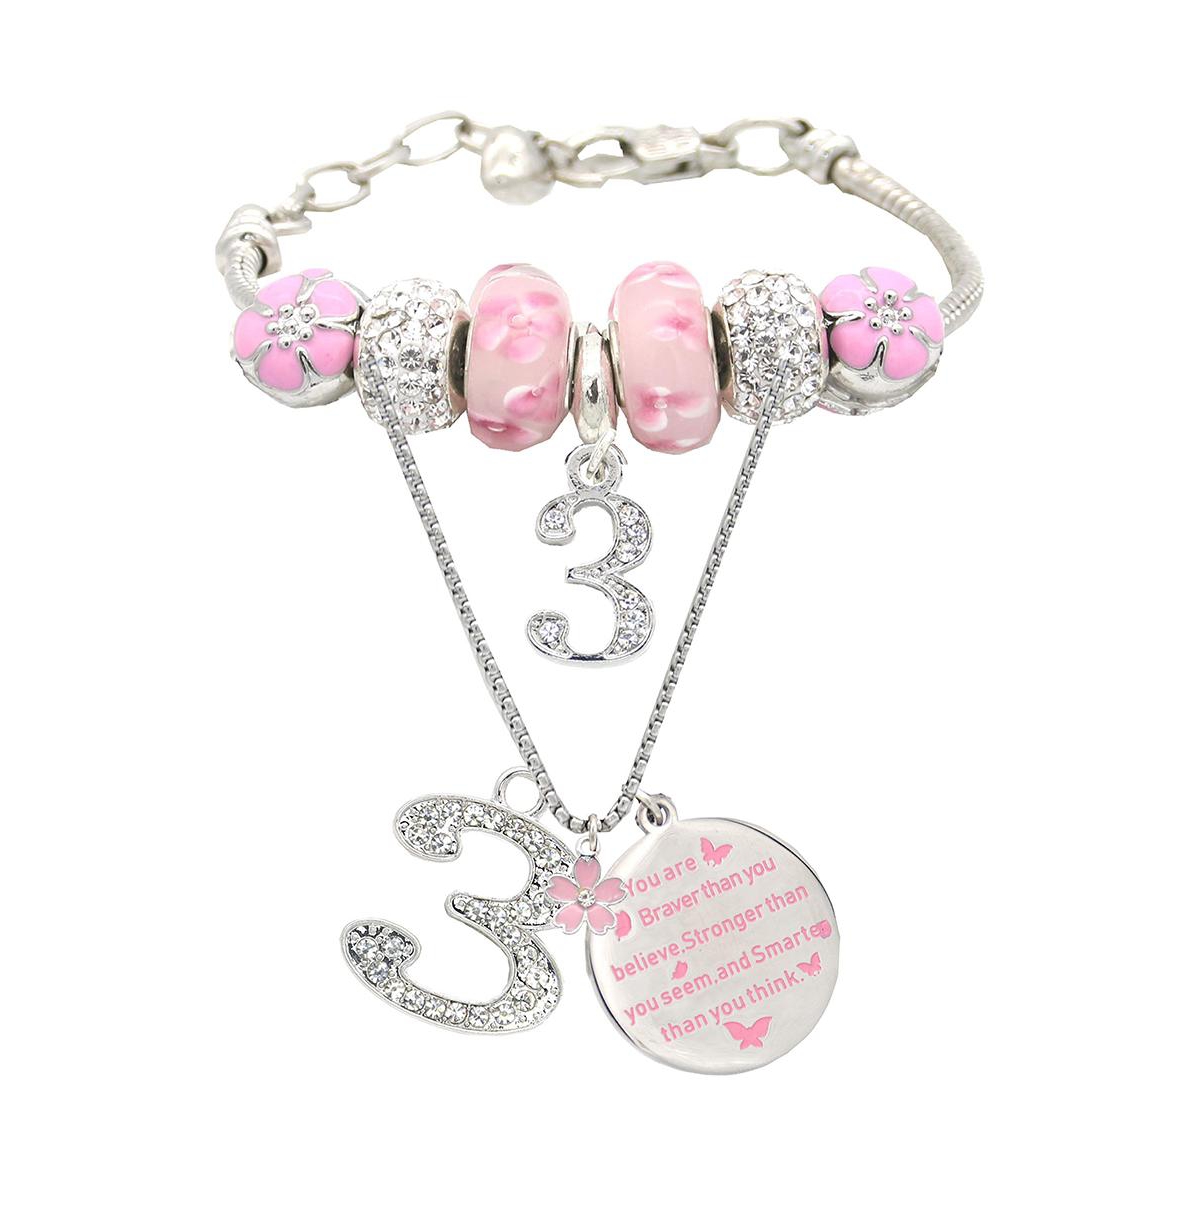 3rd Birthday Gifts for Little Girl: Necklace, Bracelet, and Jewelry Set with Decorations for Girls' Special Celebration - Pink